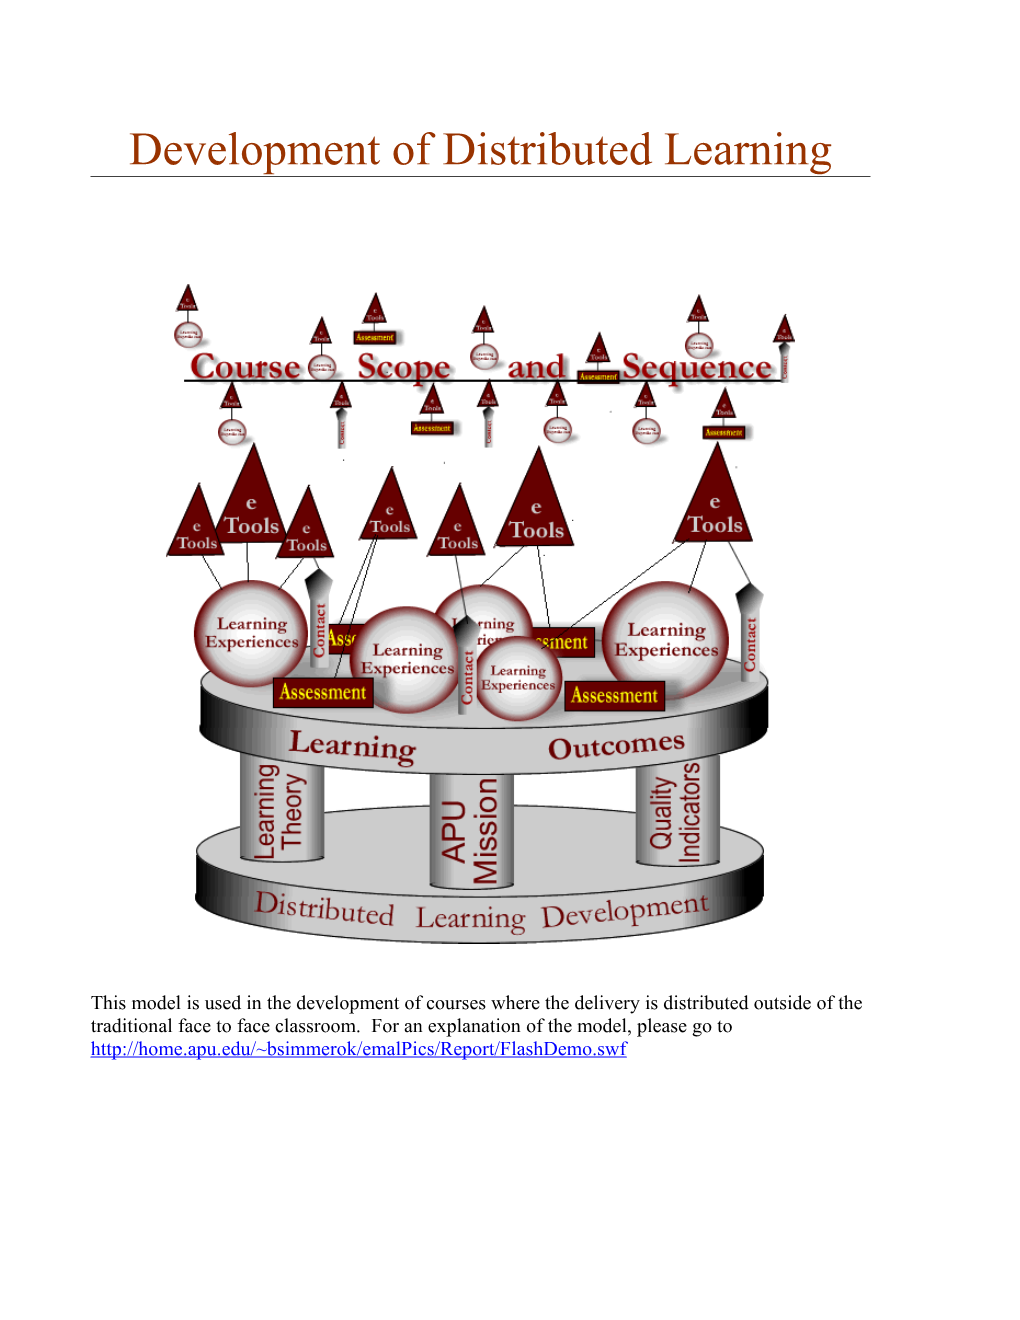 Development of Distributed Learning